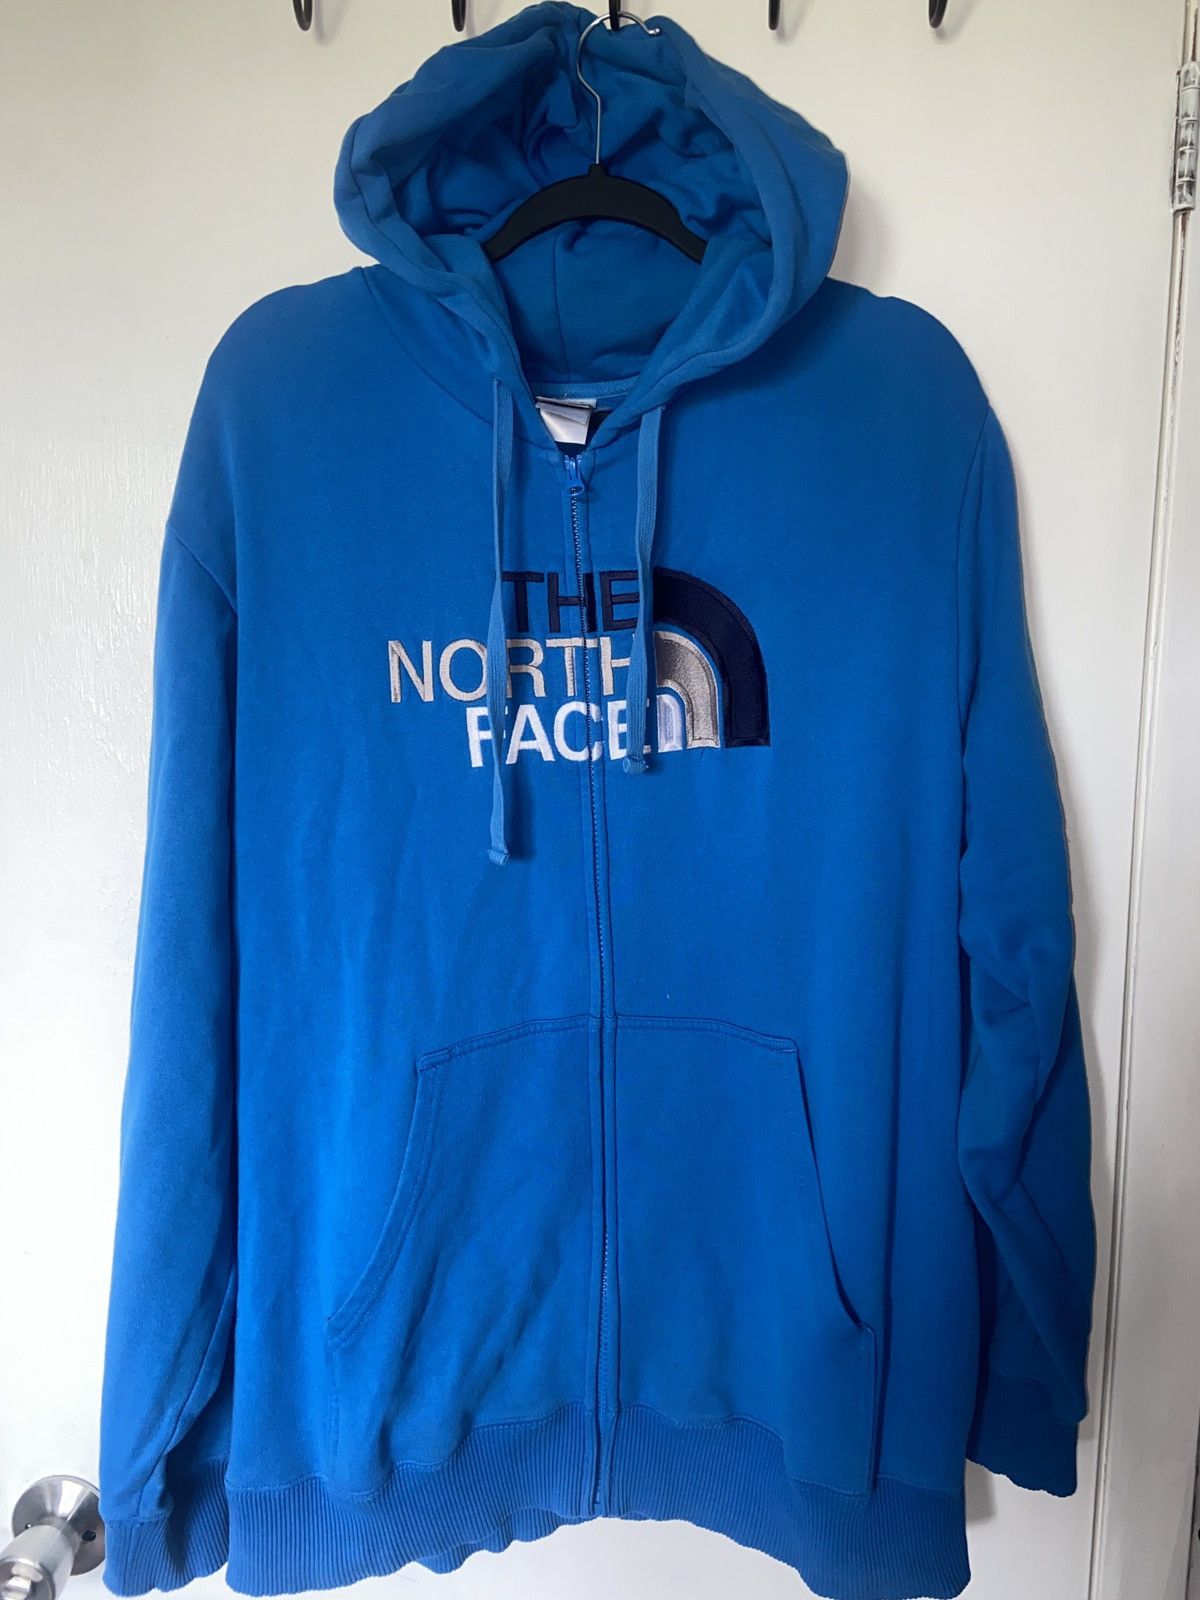 The North Face The North Face Zip Up | Grailed